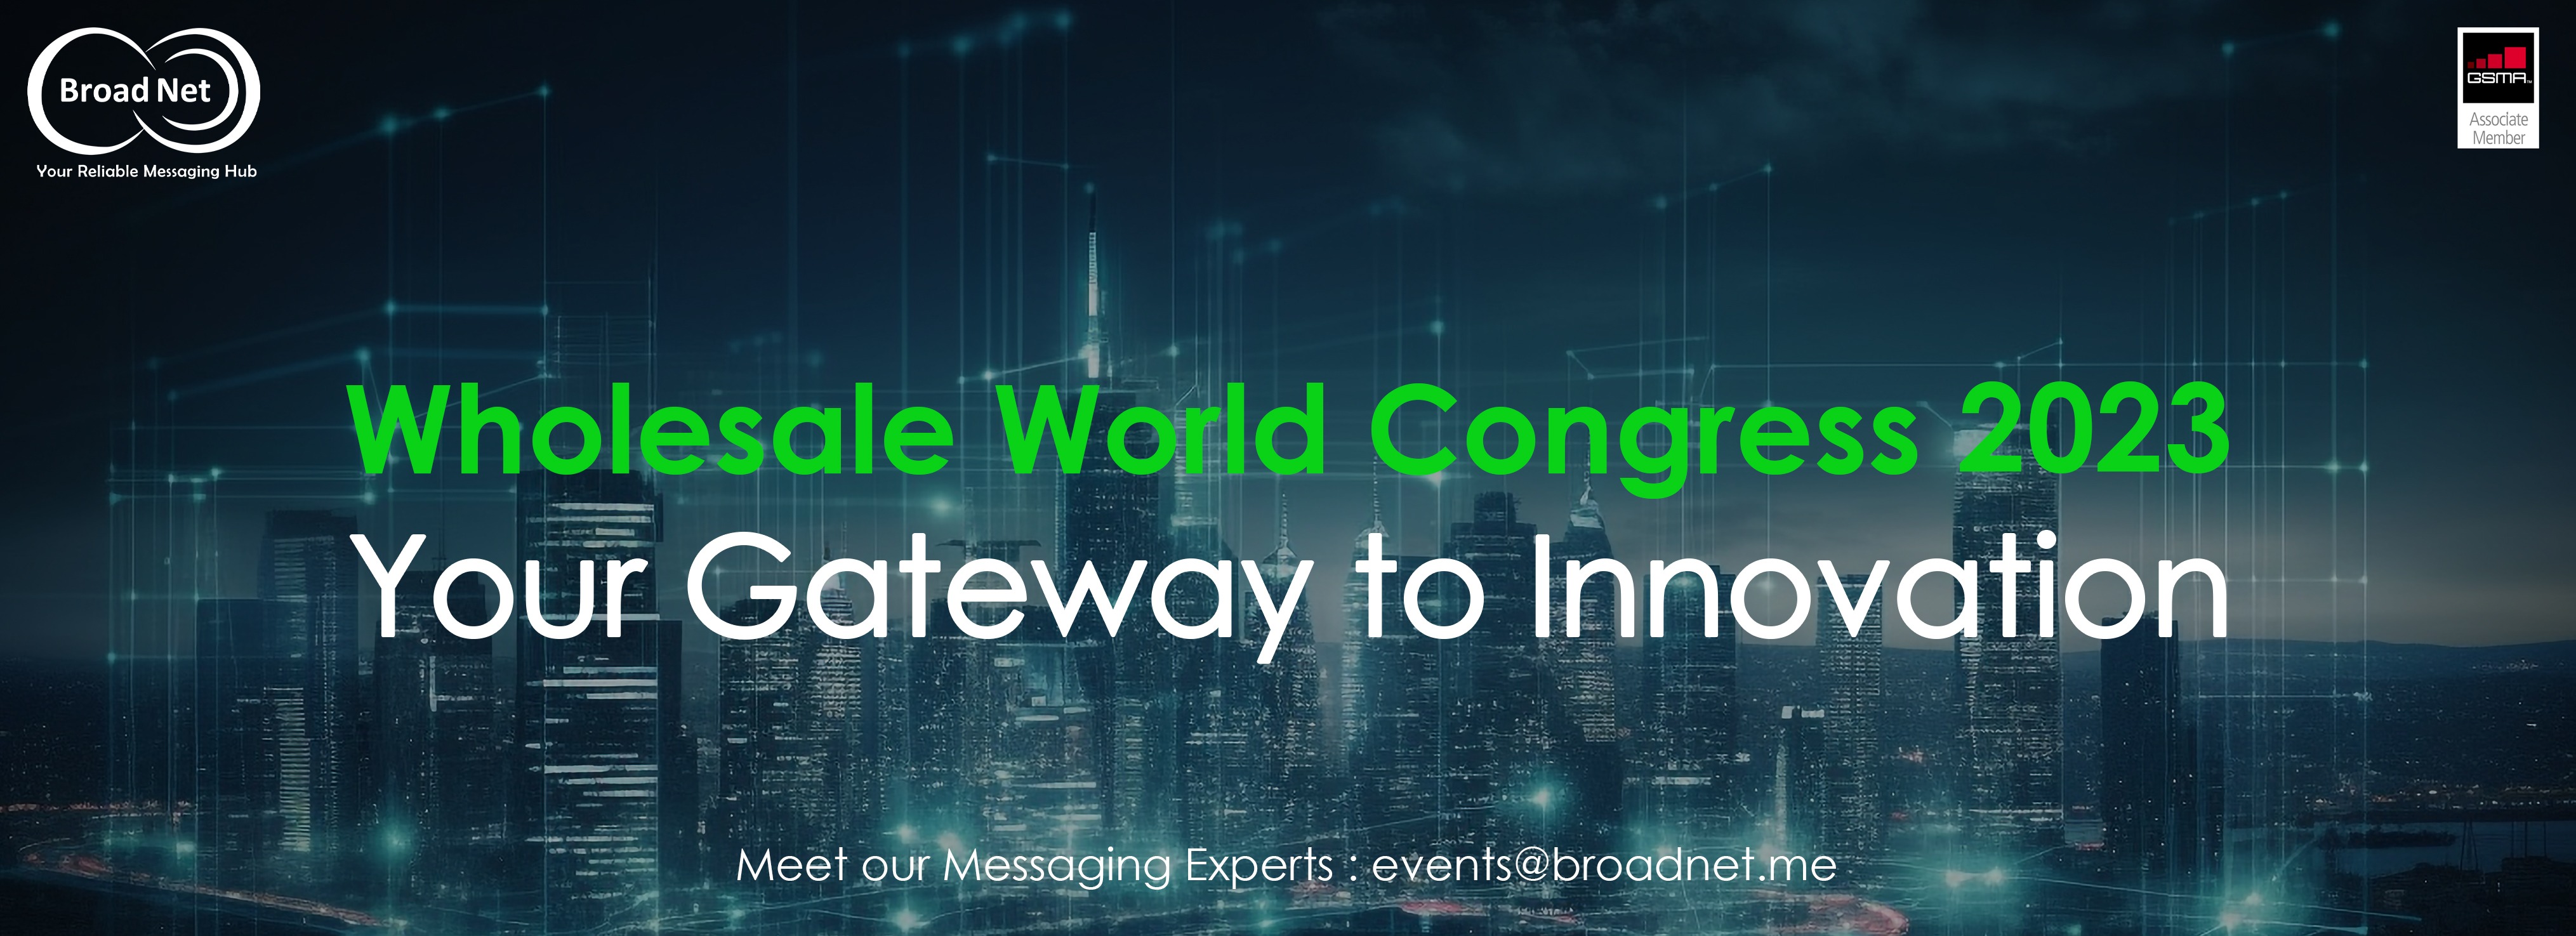 Wholesale World Congress 2023: Your Gateway to Innovation!